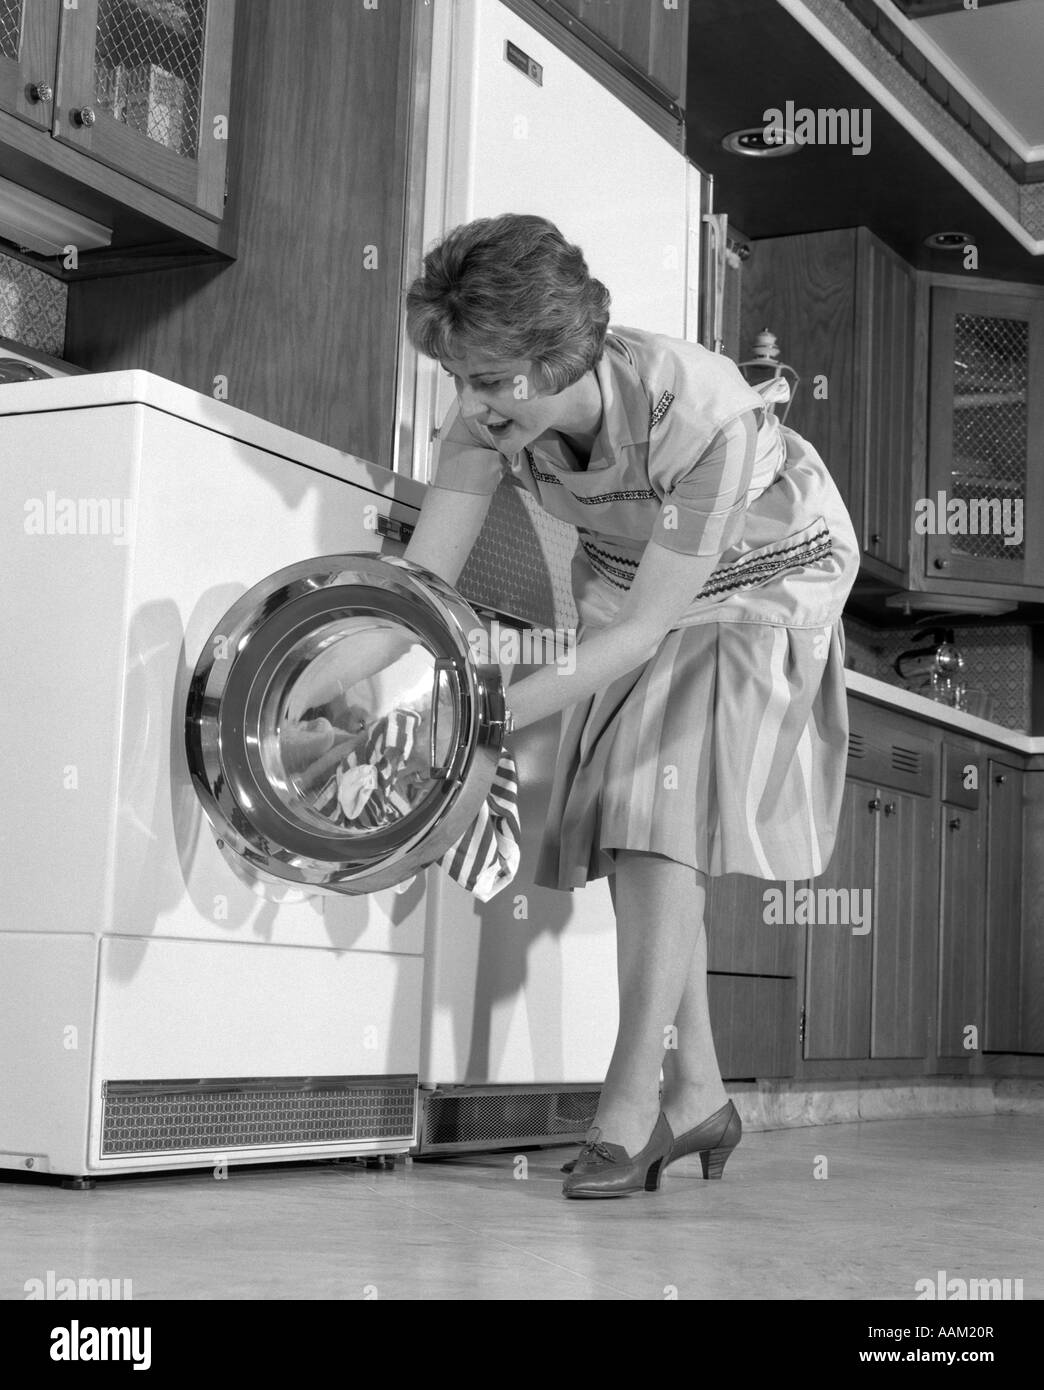 https://c8.alamy.com/comp/AAM20R/1960s-housewife-in-kitchen-putting-laundry-into-washer-AAM20R.jpg